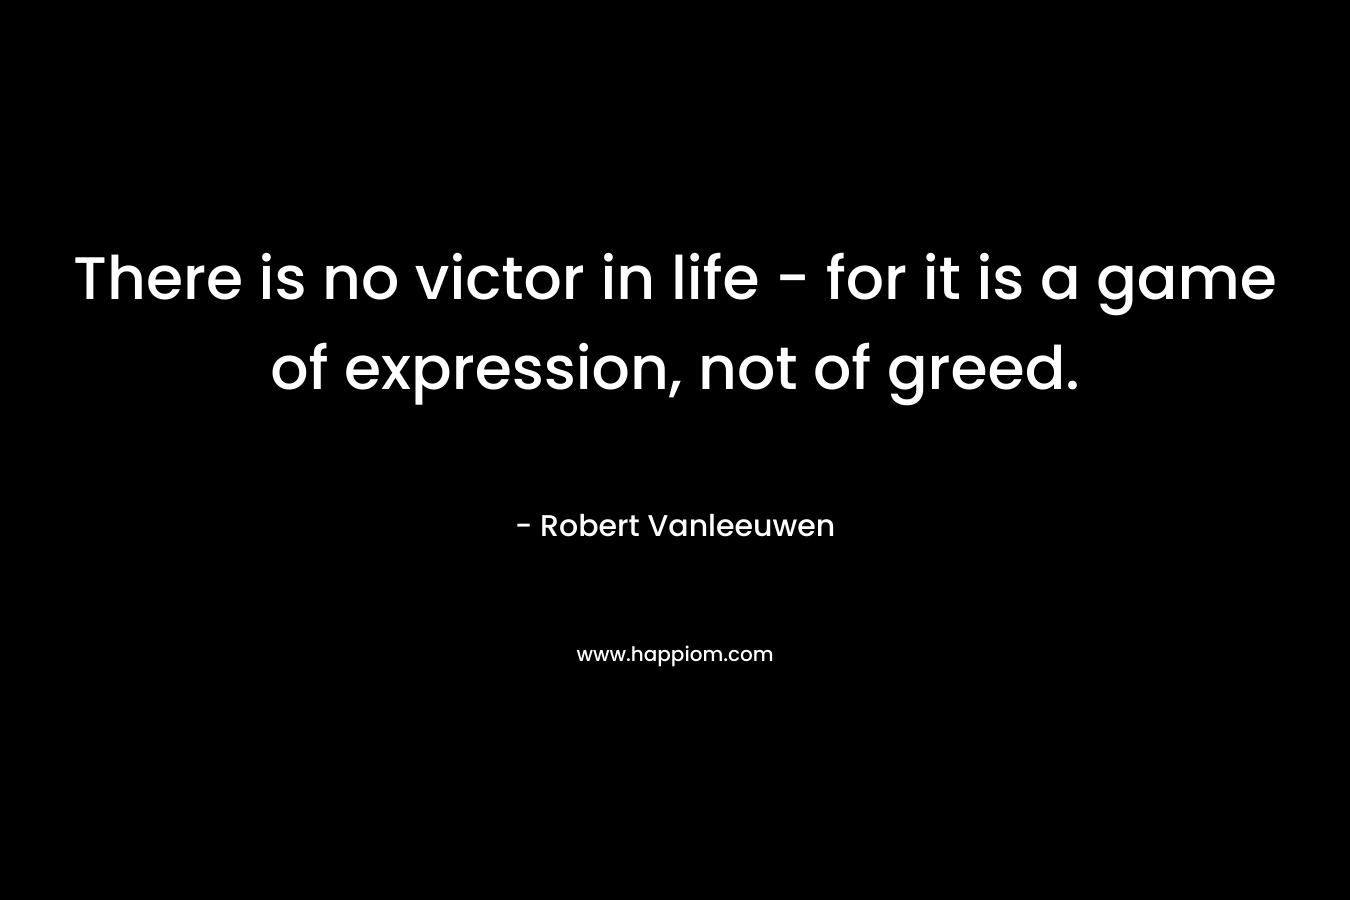 There is no victor in life – for it is a game of expression, not of greed. – Robert Vanleeuwen